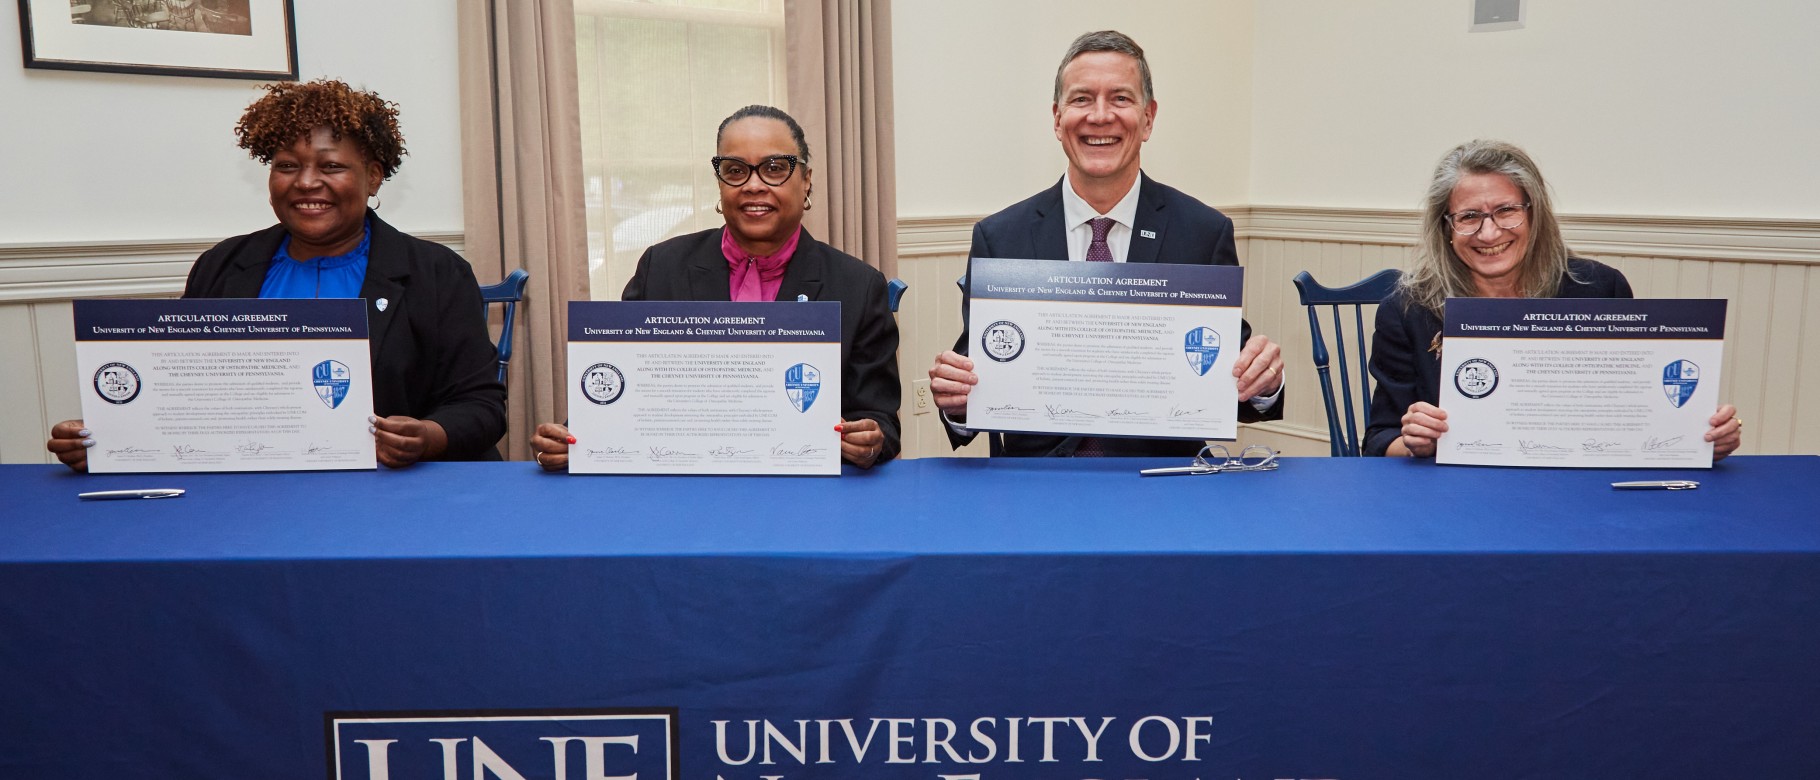 UNE and Cheyney University officials, including UNE President James Herbert and UNE COM Dean Jane Carreiro, hold signed copies of the articulation agreement